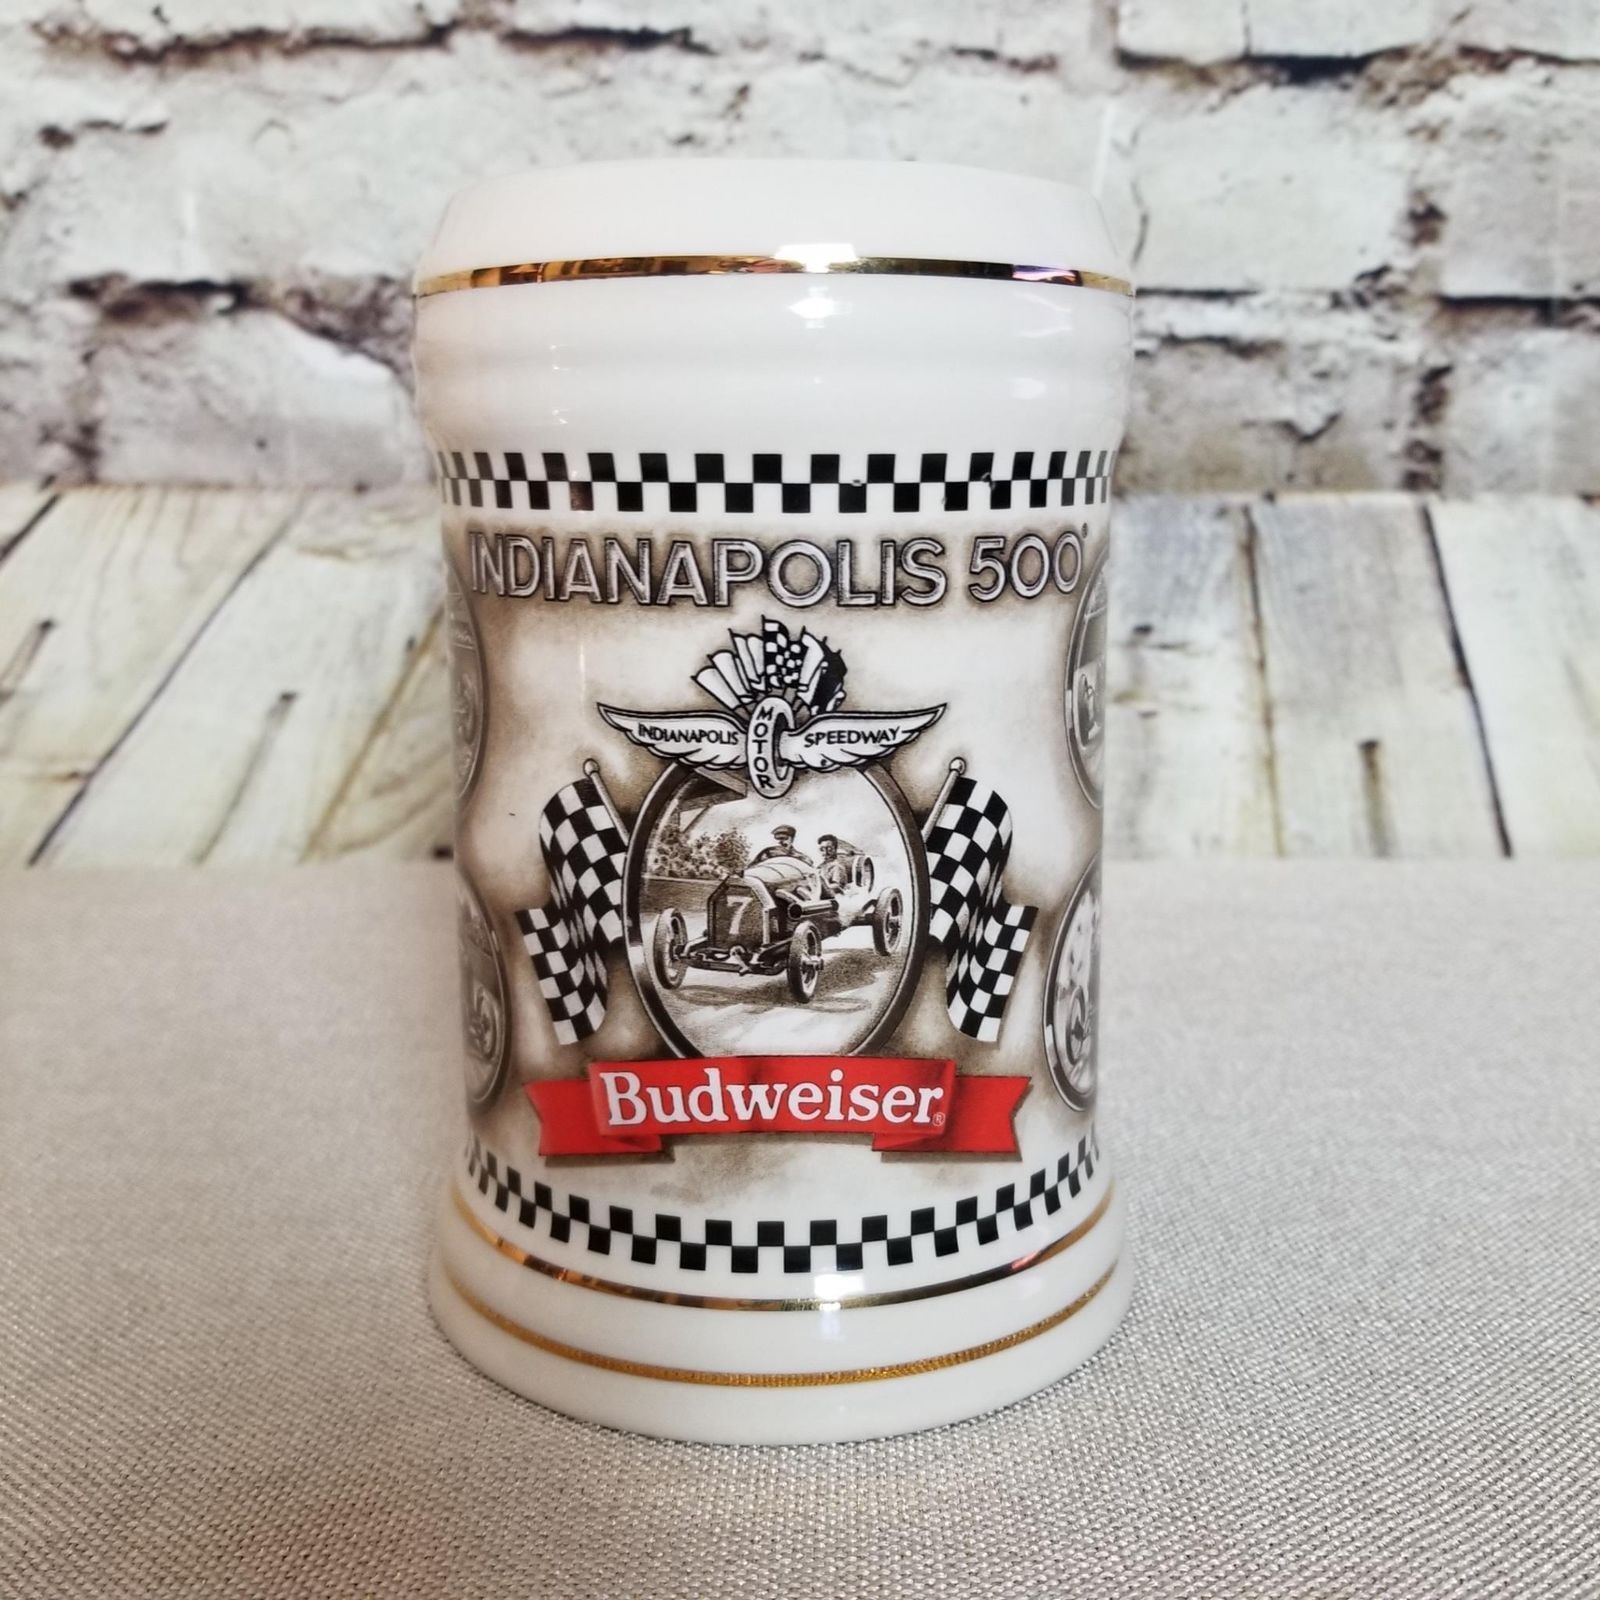 Budweiser Special Event Drinking Stein Indianapolis 500 Collectors Piece 1996